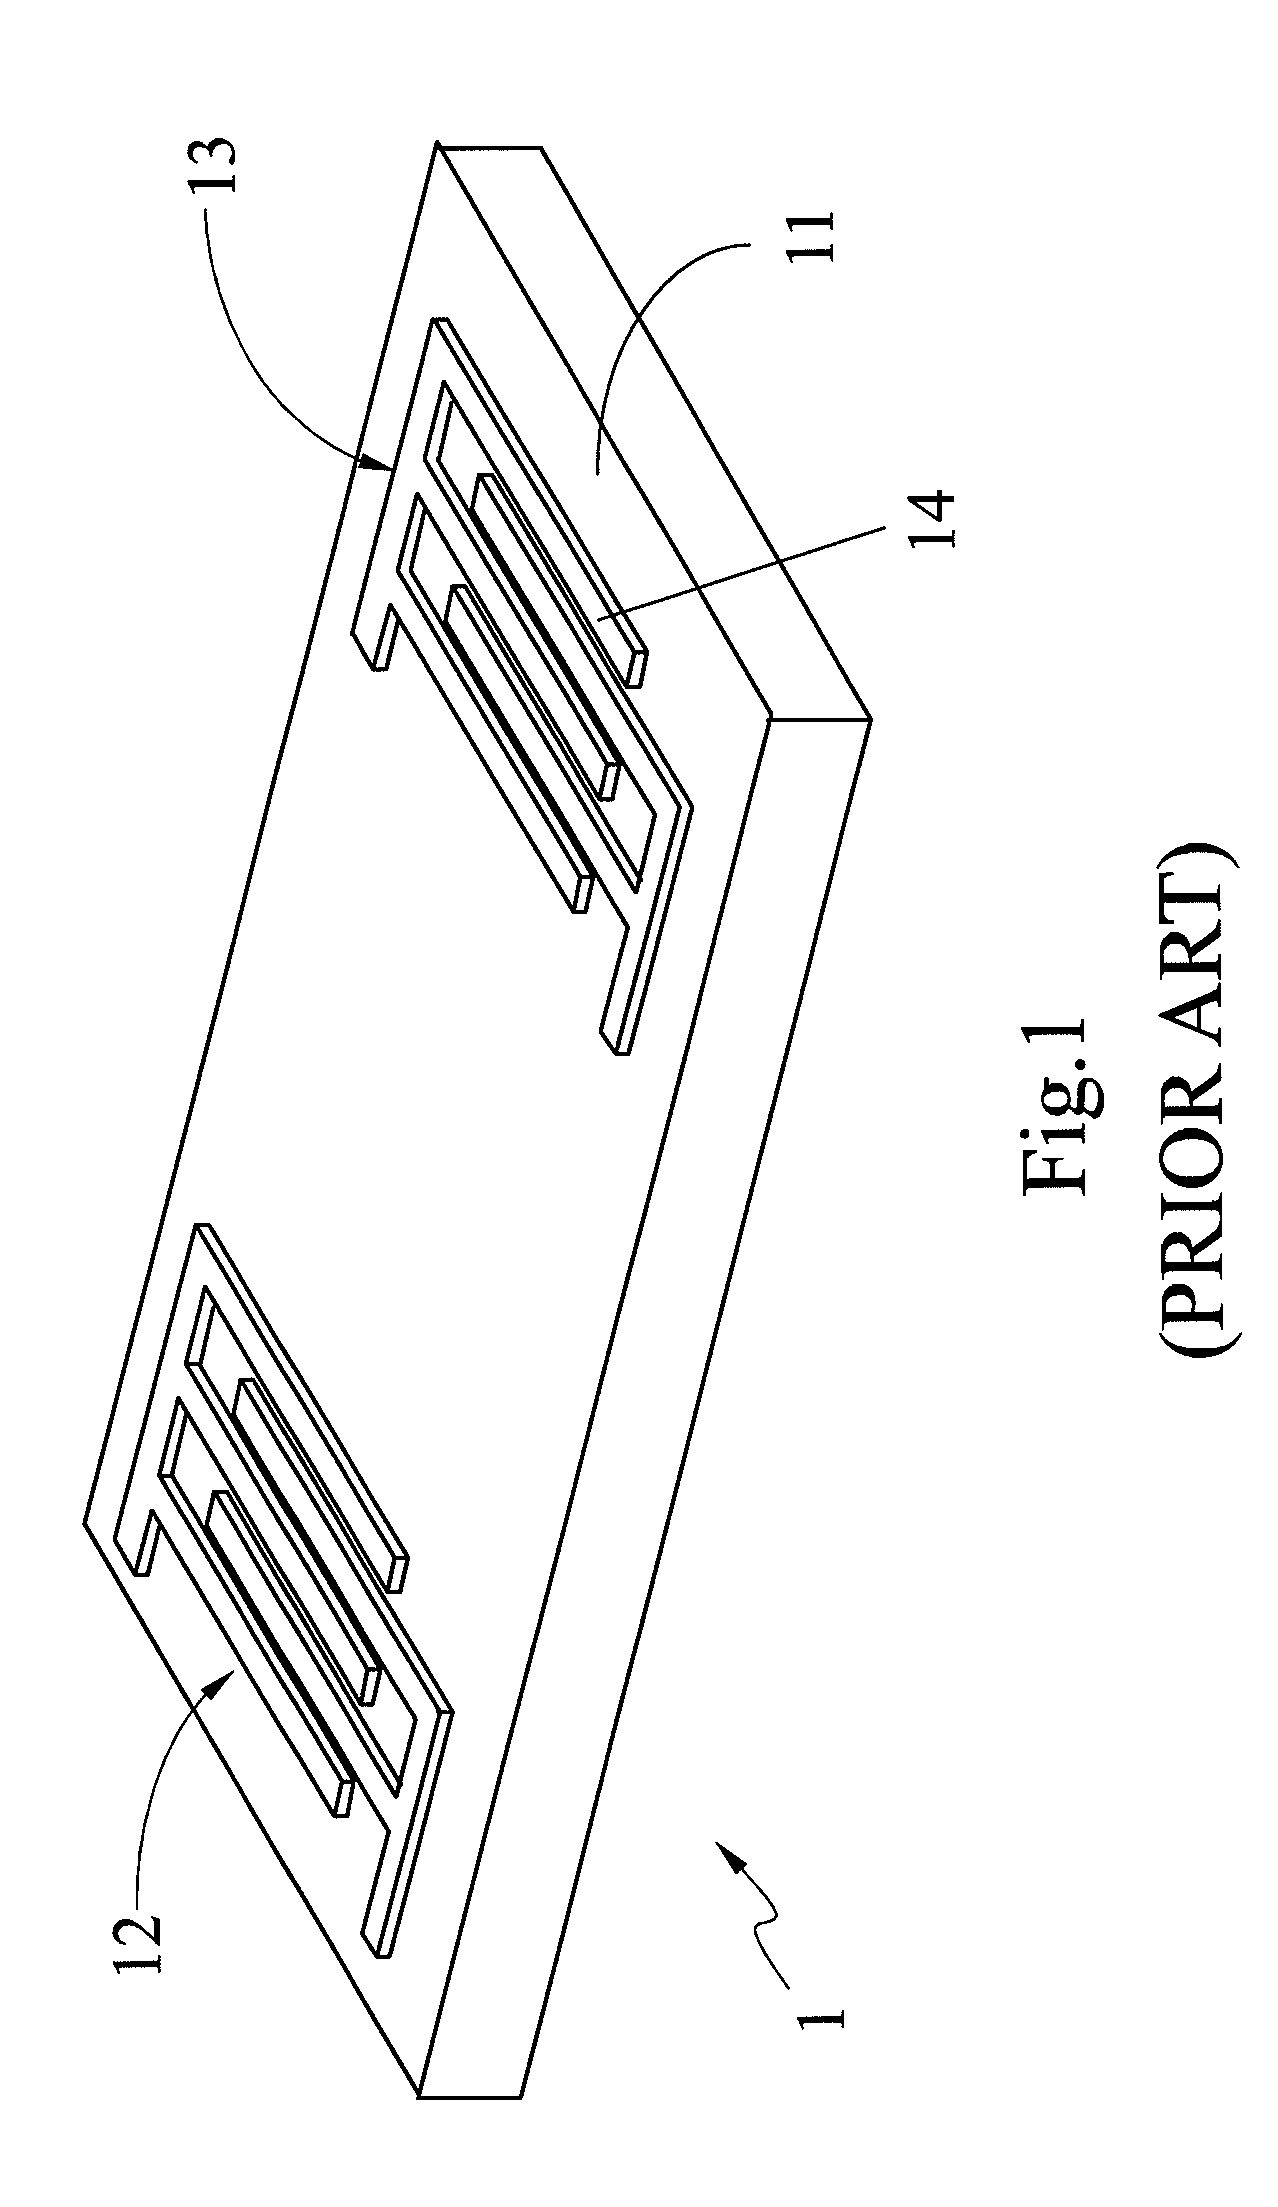 Biosensor and method using the same to perform a biotest